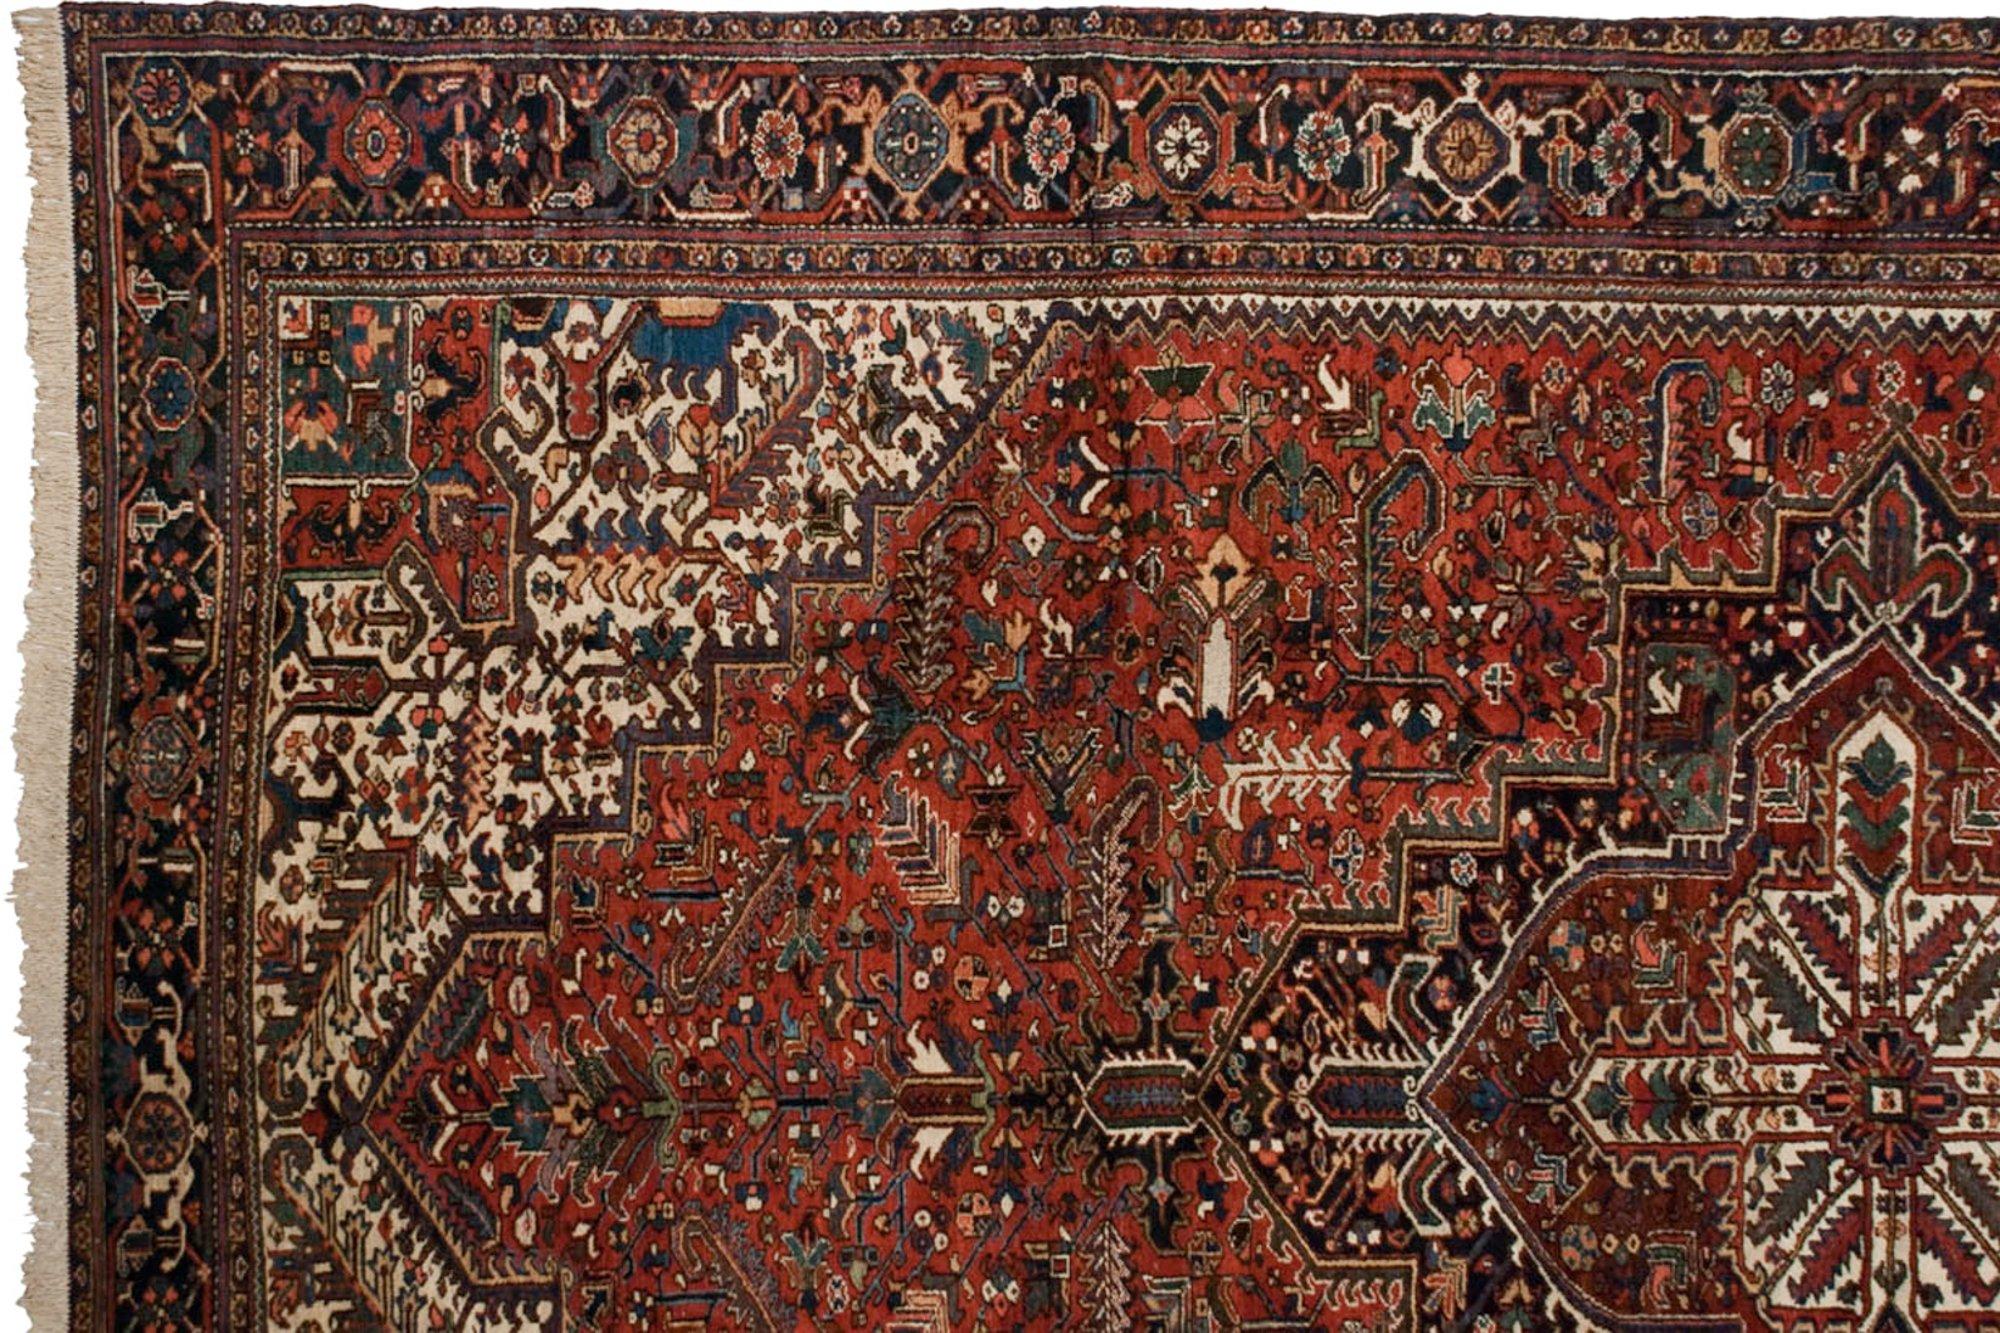 :: Fantastic earlier Mehrivan carpet in tremendous scale and unusual proportions. Concentric center medallions bursting from the middle, each bearing outwardly pointed simplistic geometric layered floral design motif, atop a covered field in